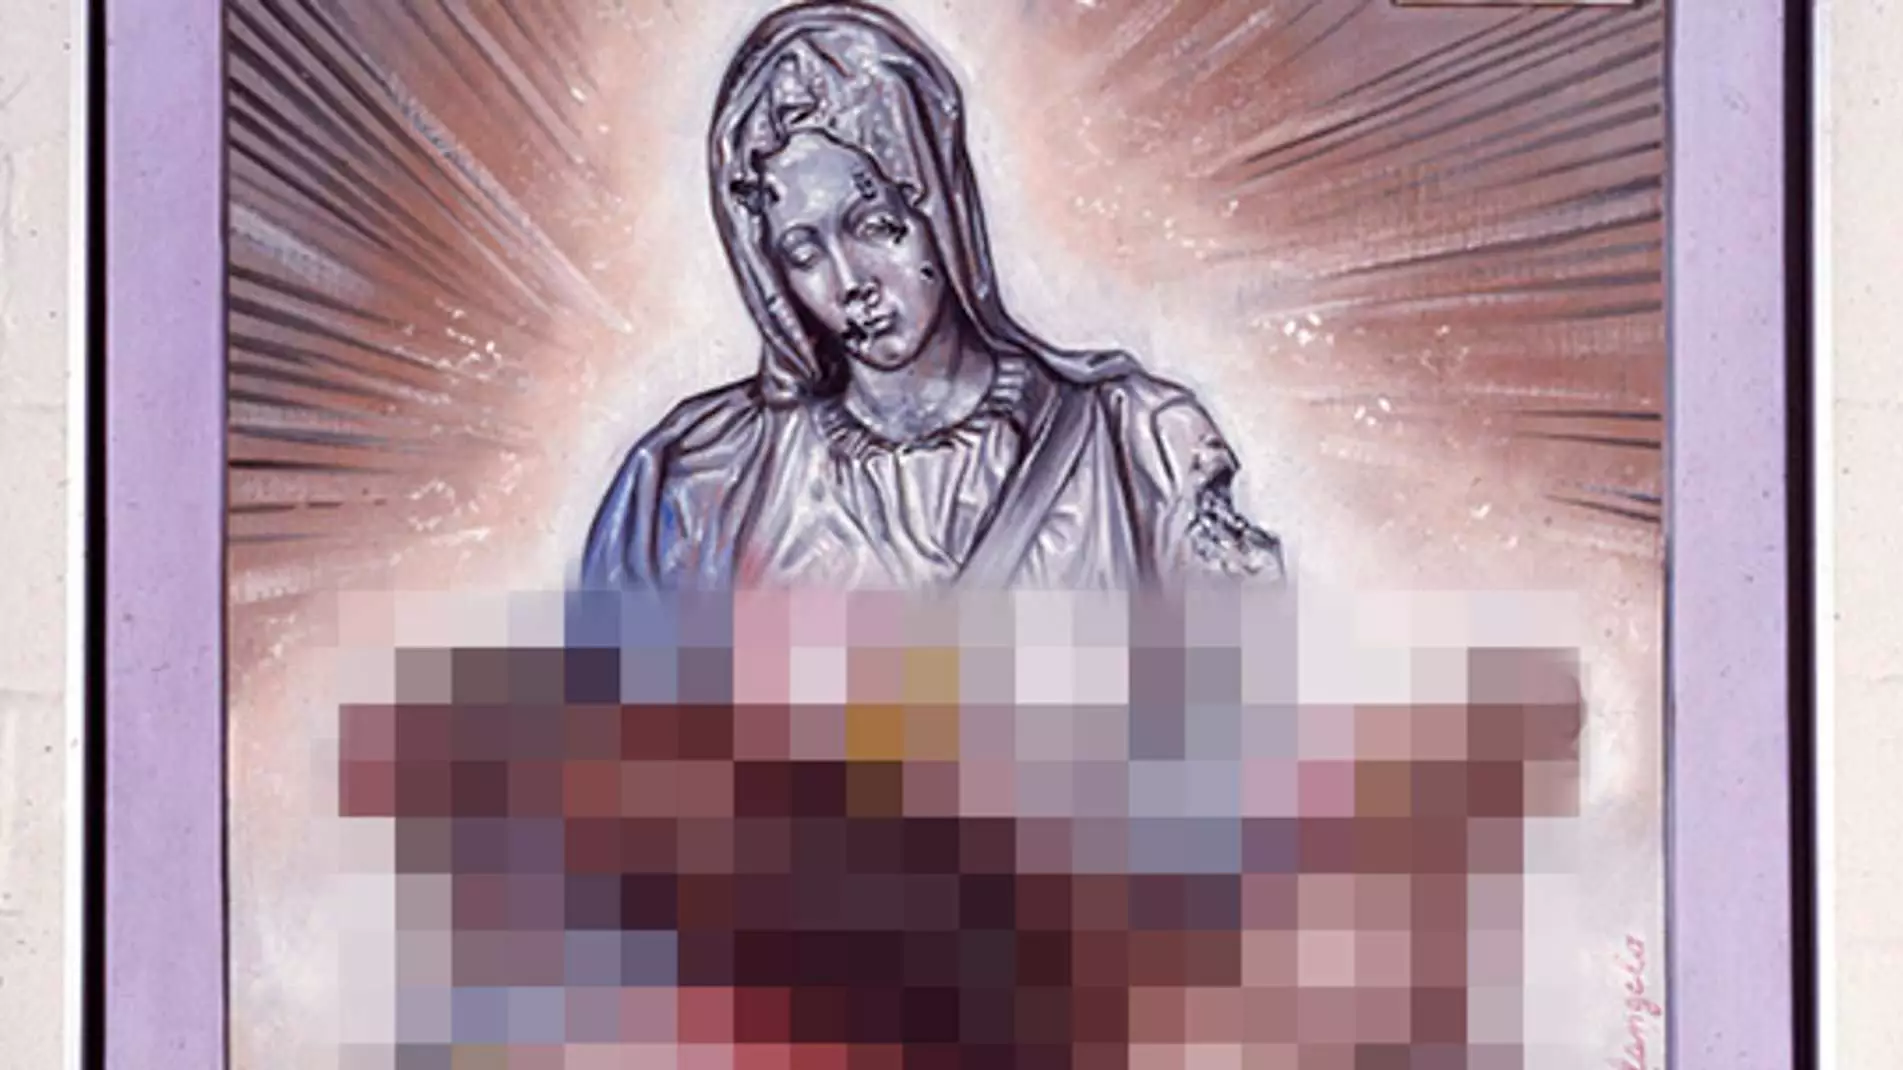 Christian Groups Fuming Over Artwork Of Virgin Mary Cradling Massive Penis At Aussie Exhibition